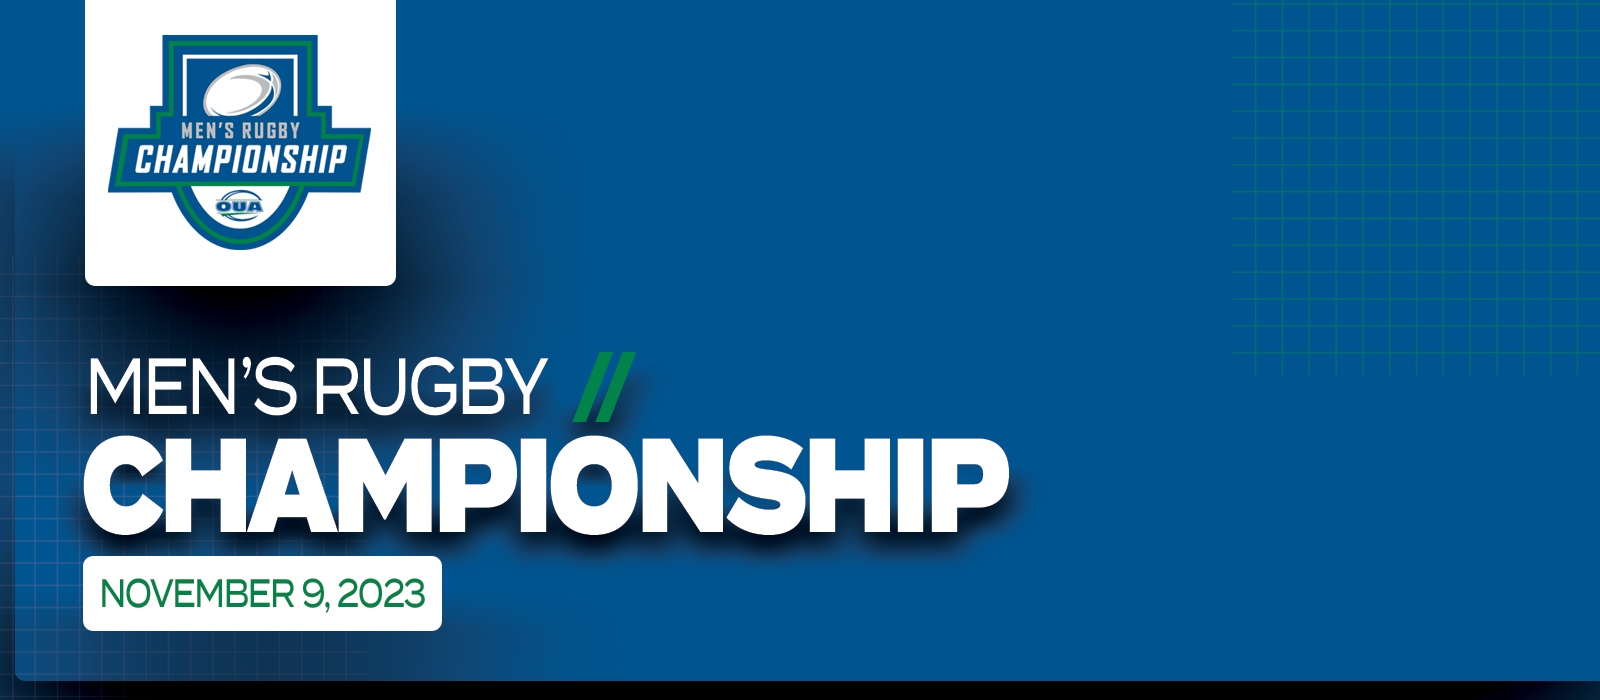 Predominantly blue graphic with large white text on the left side that reads Men’s Rugby Championship, November 9, 2023’ beneath the OUA Men’s Rugby Championship logo